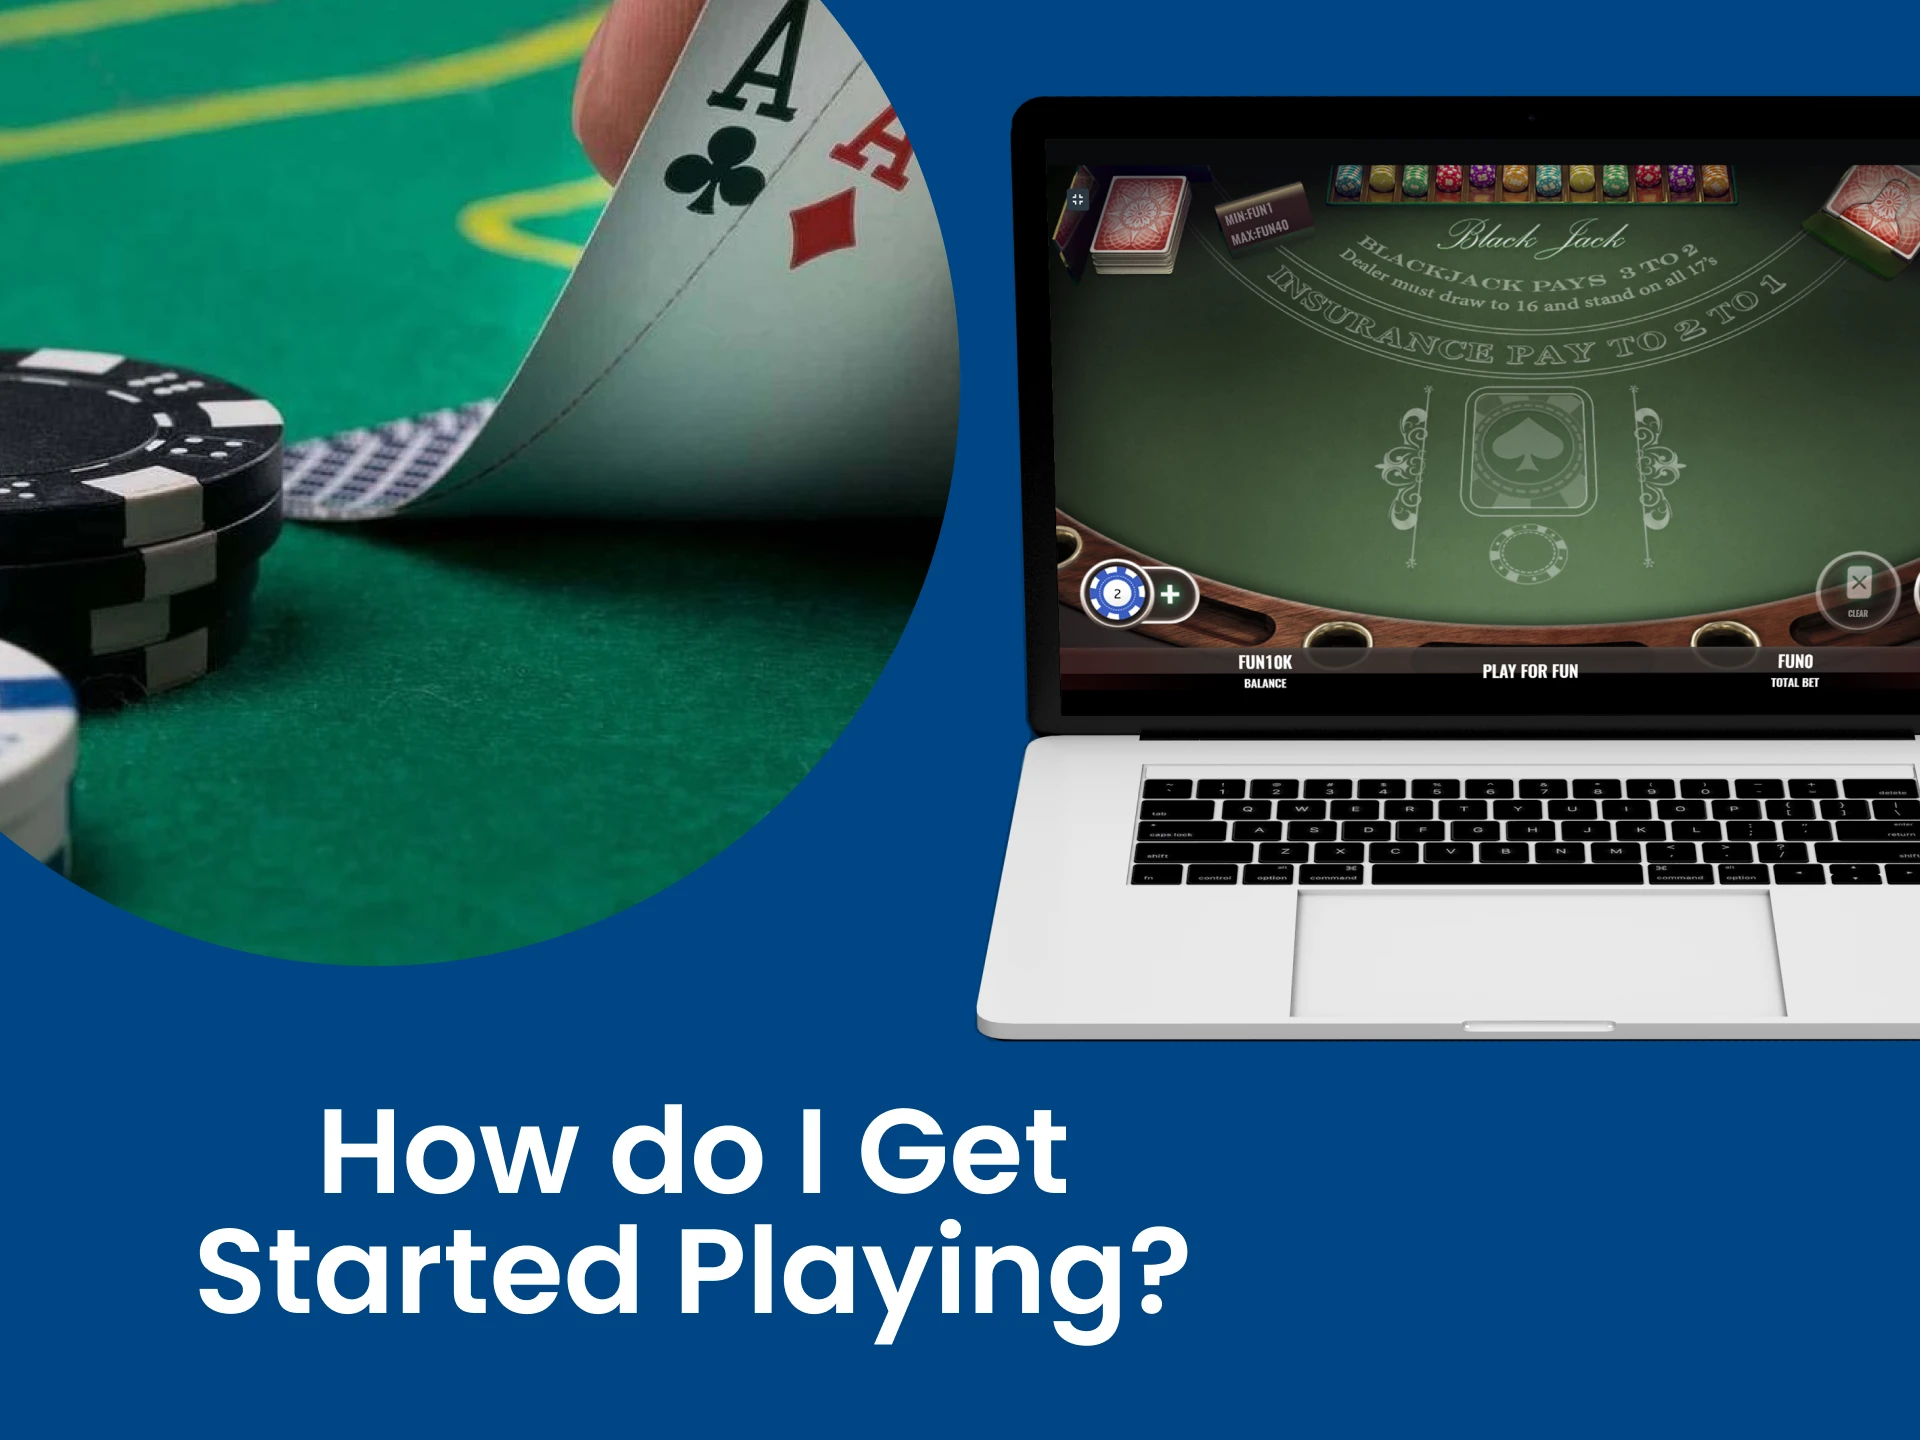 We will tell you how to start playing blackjack.